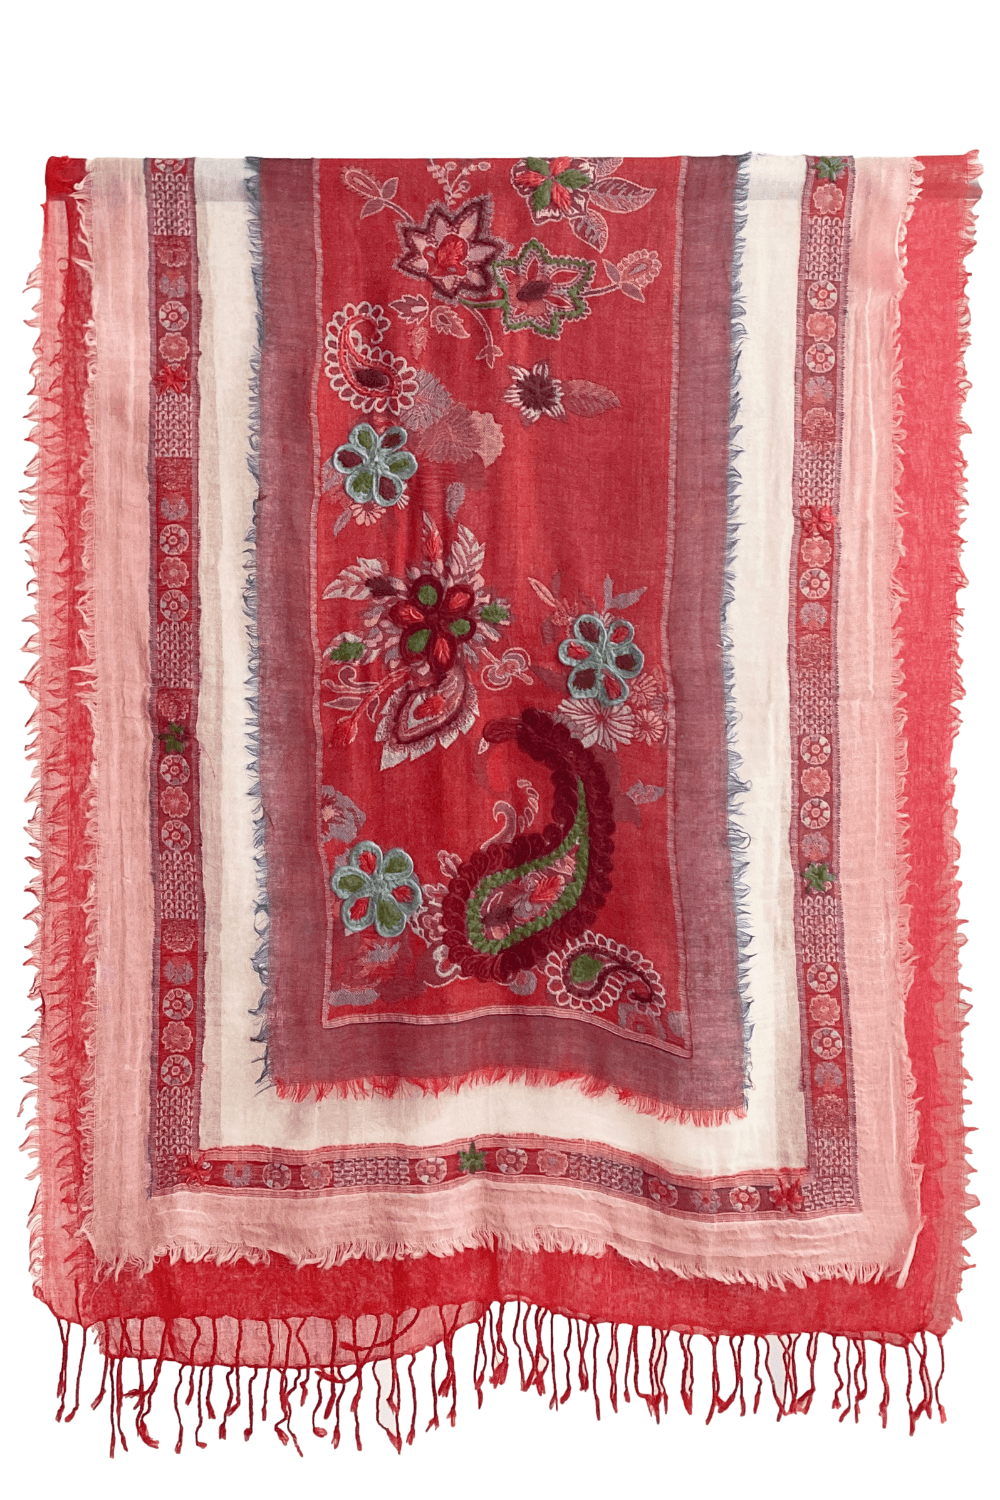 Reds and pink paper wool scarf with hand stitched design detail.